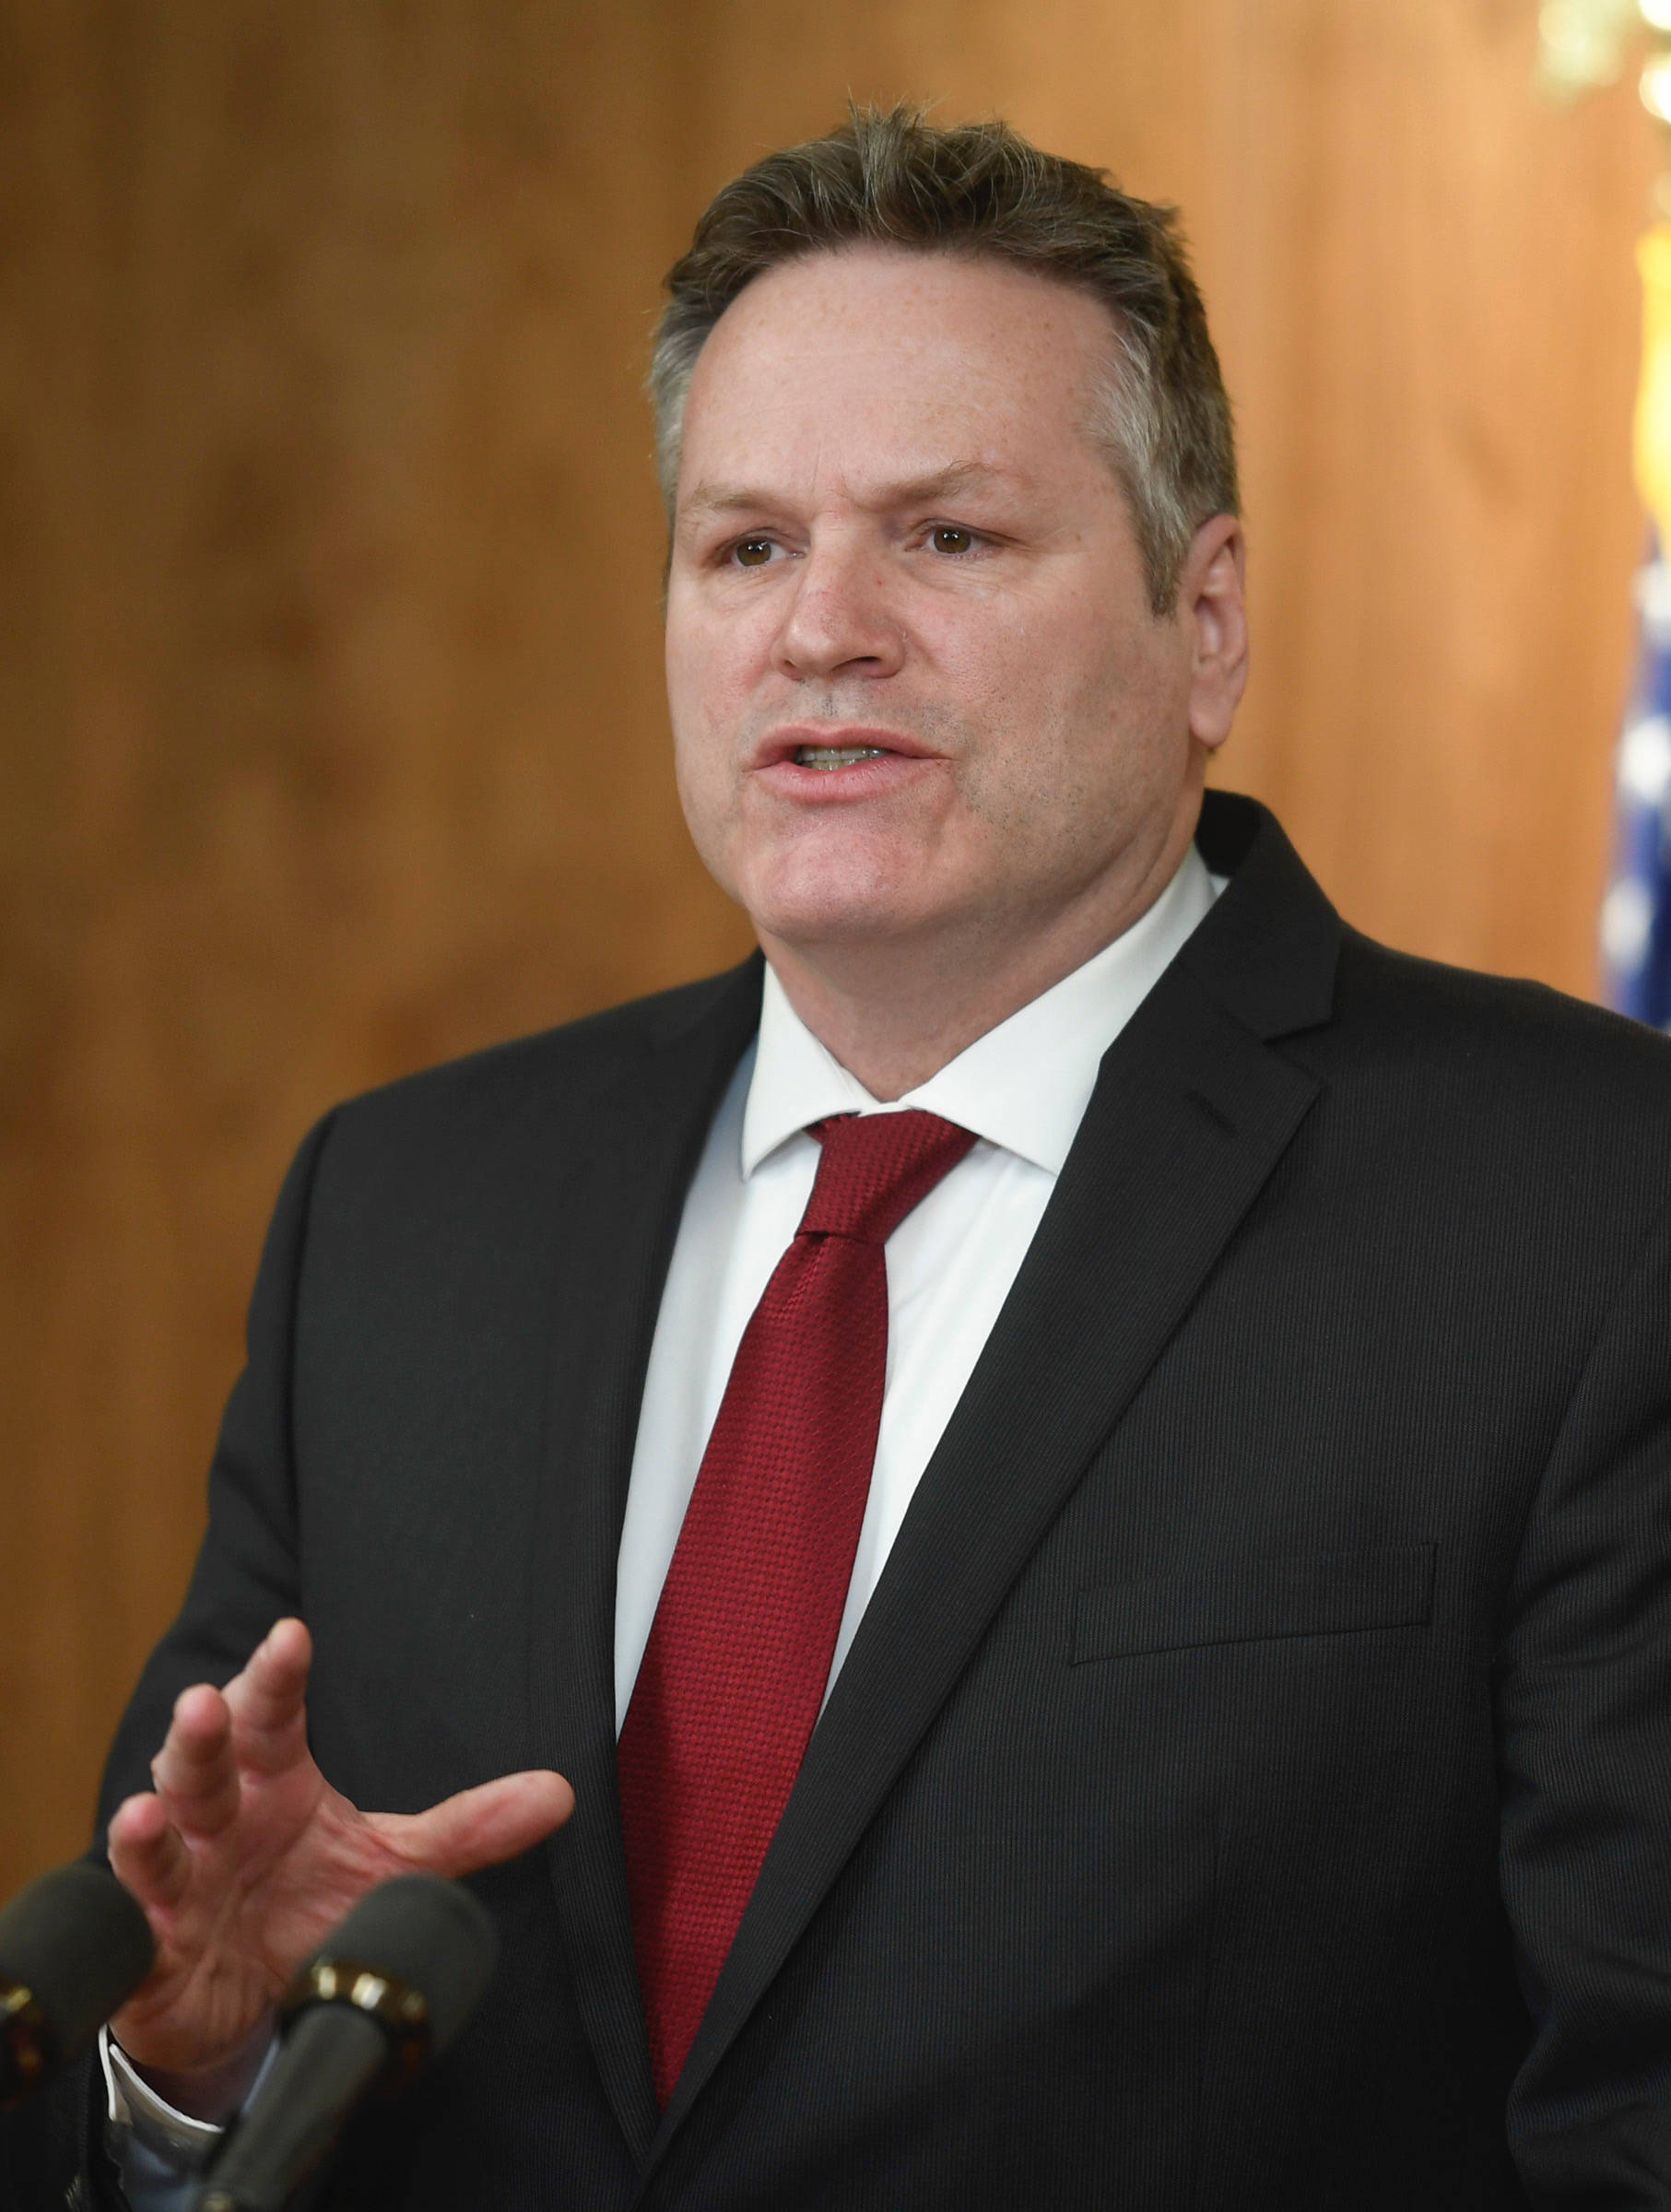 Gov. Mike Dunleavy announces his budget during a press conference to announce the state’s budget on Wednesday, Feb. 13, 2019. (Michael Penn | Juneau Empire)